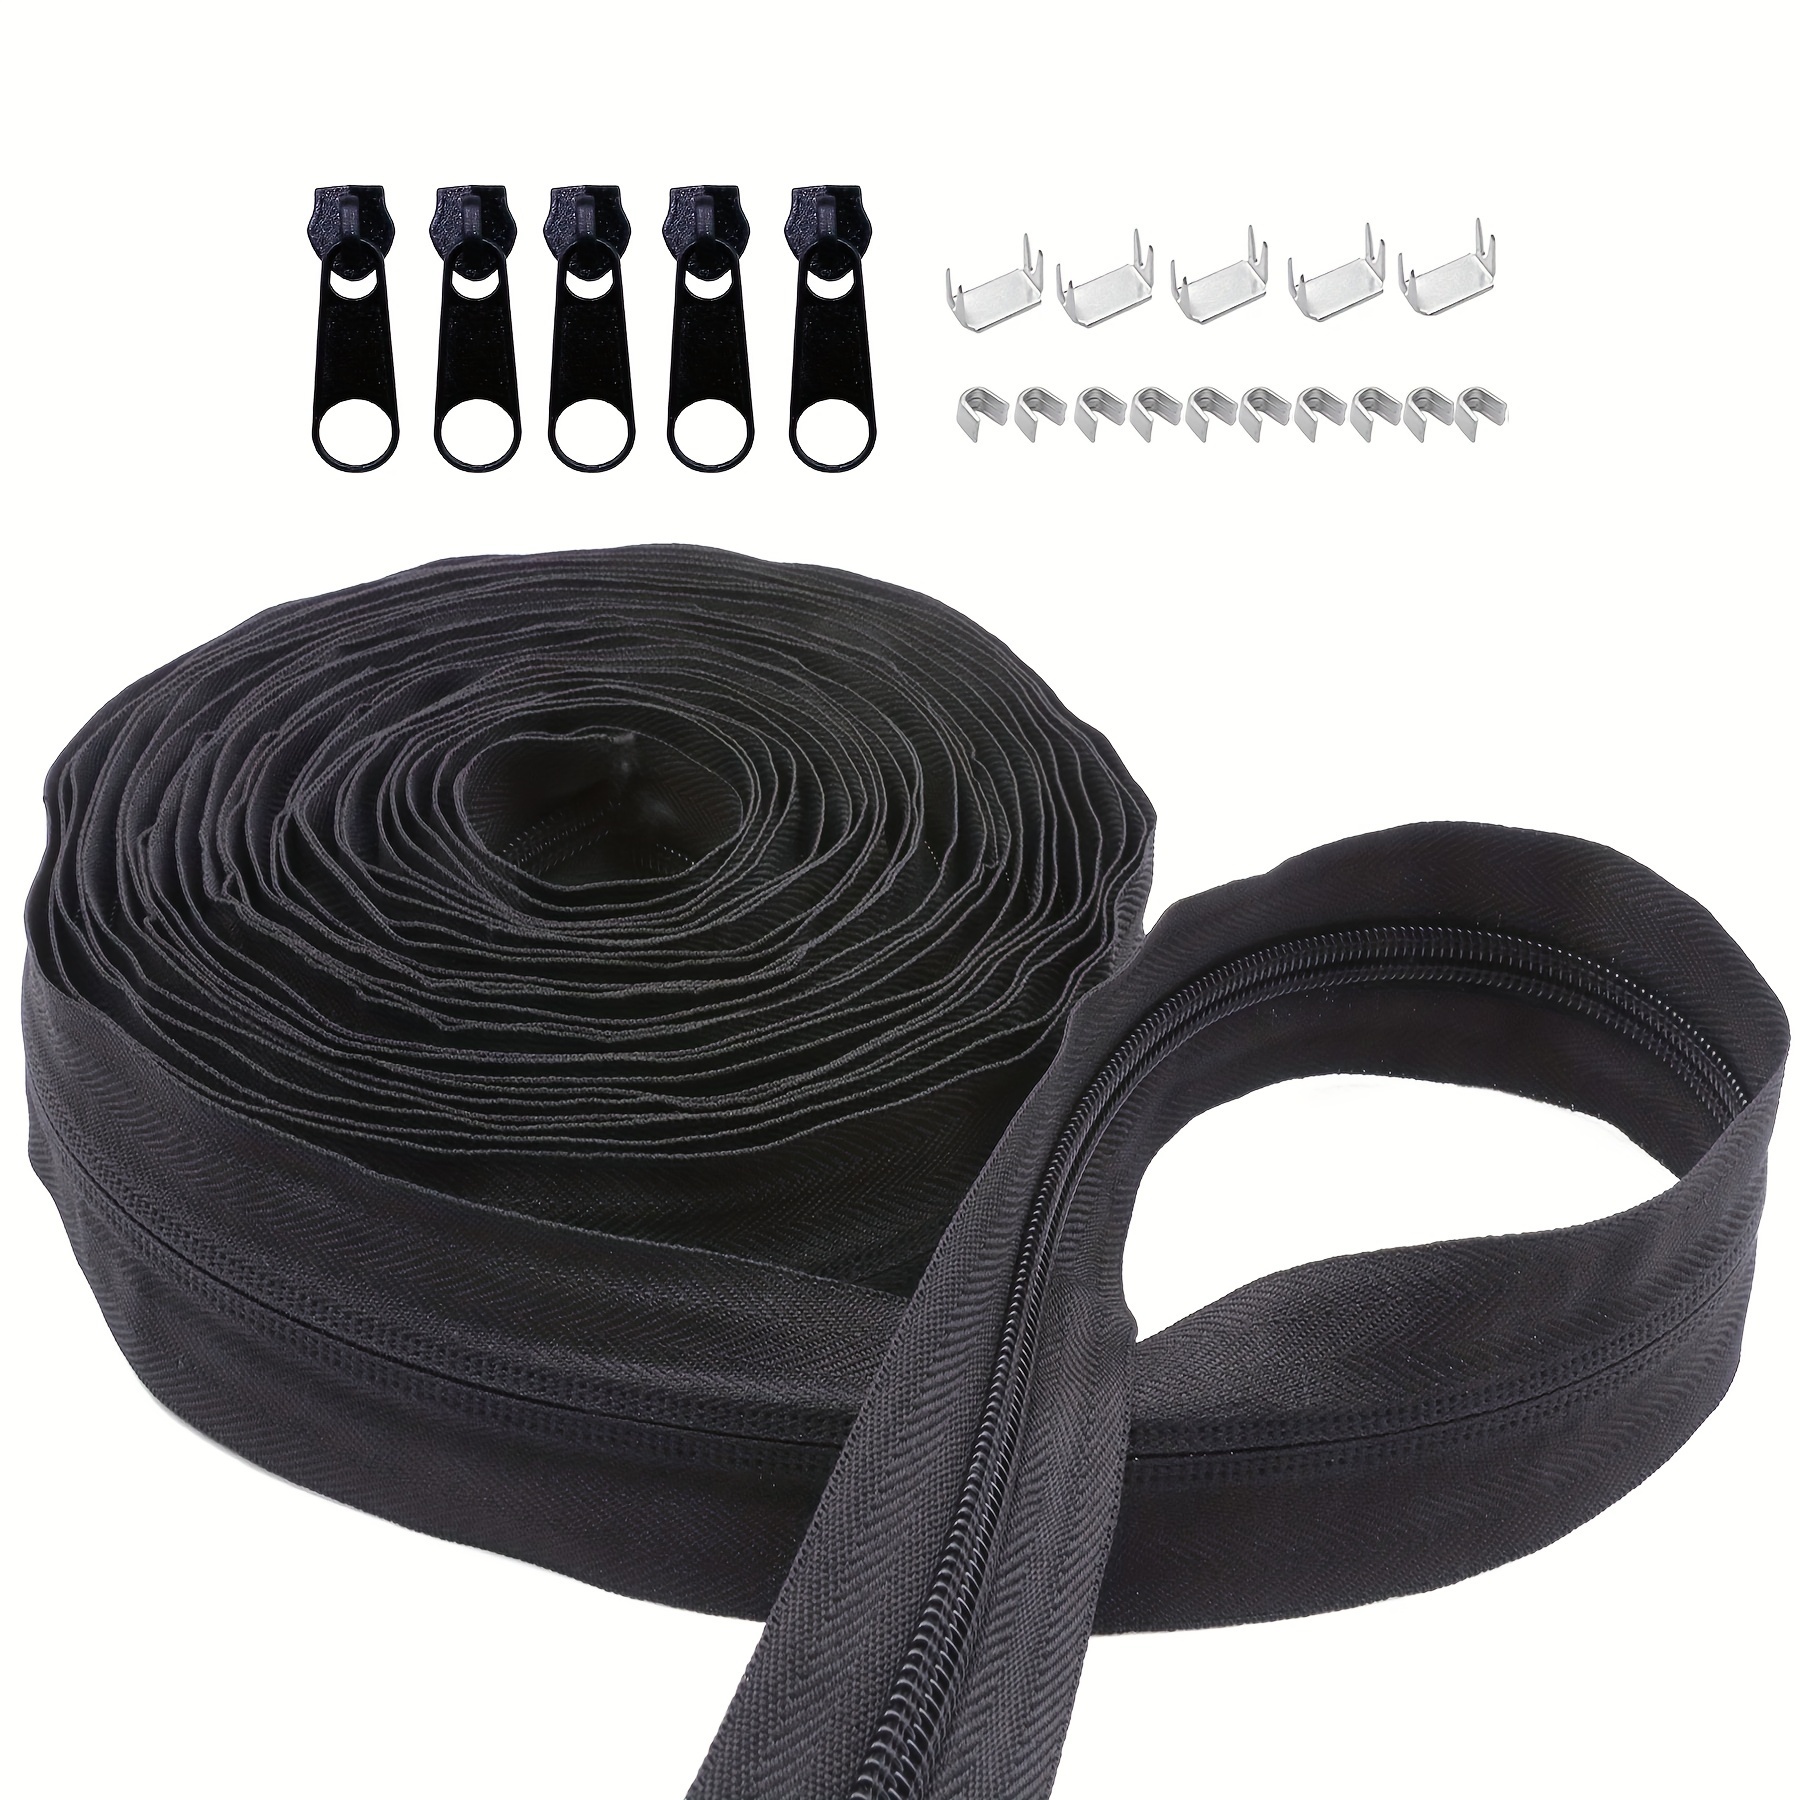  20 Yards Nylon Coil Zippers by The Yard with 30 Pieces Sliders  Metallic Zipper Teeth DIY Long Zippers Bulk Kit for Sewing Craft Bag, 5  (Black, White)